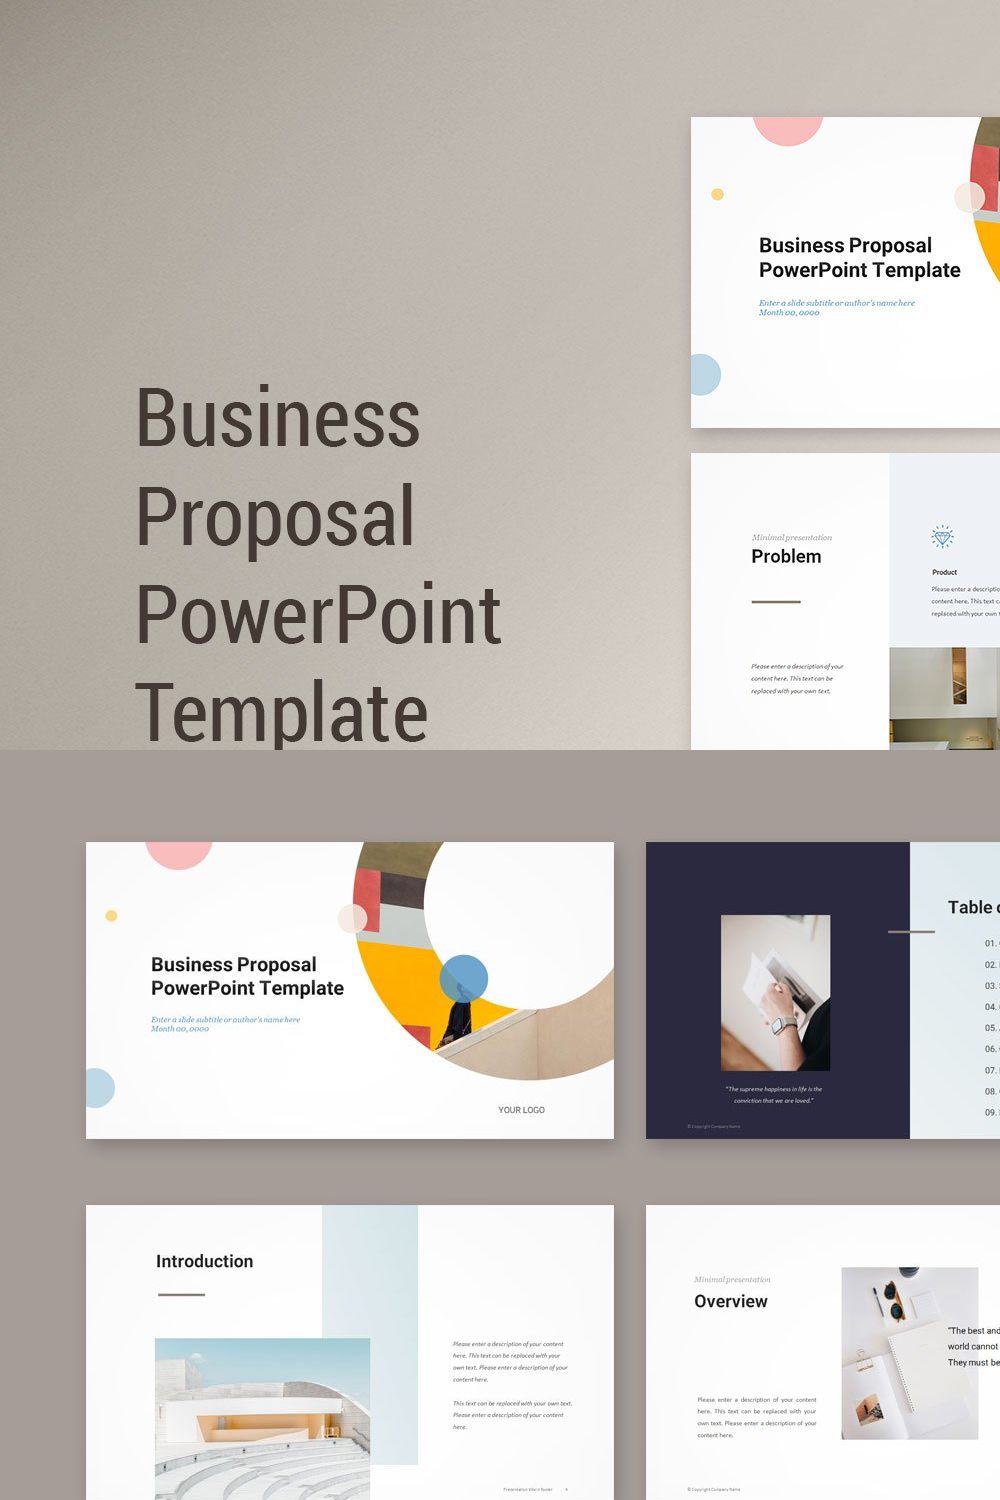 Business Proposal Template pinterest preview image.